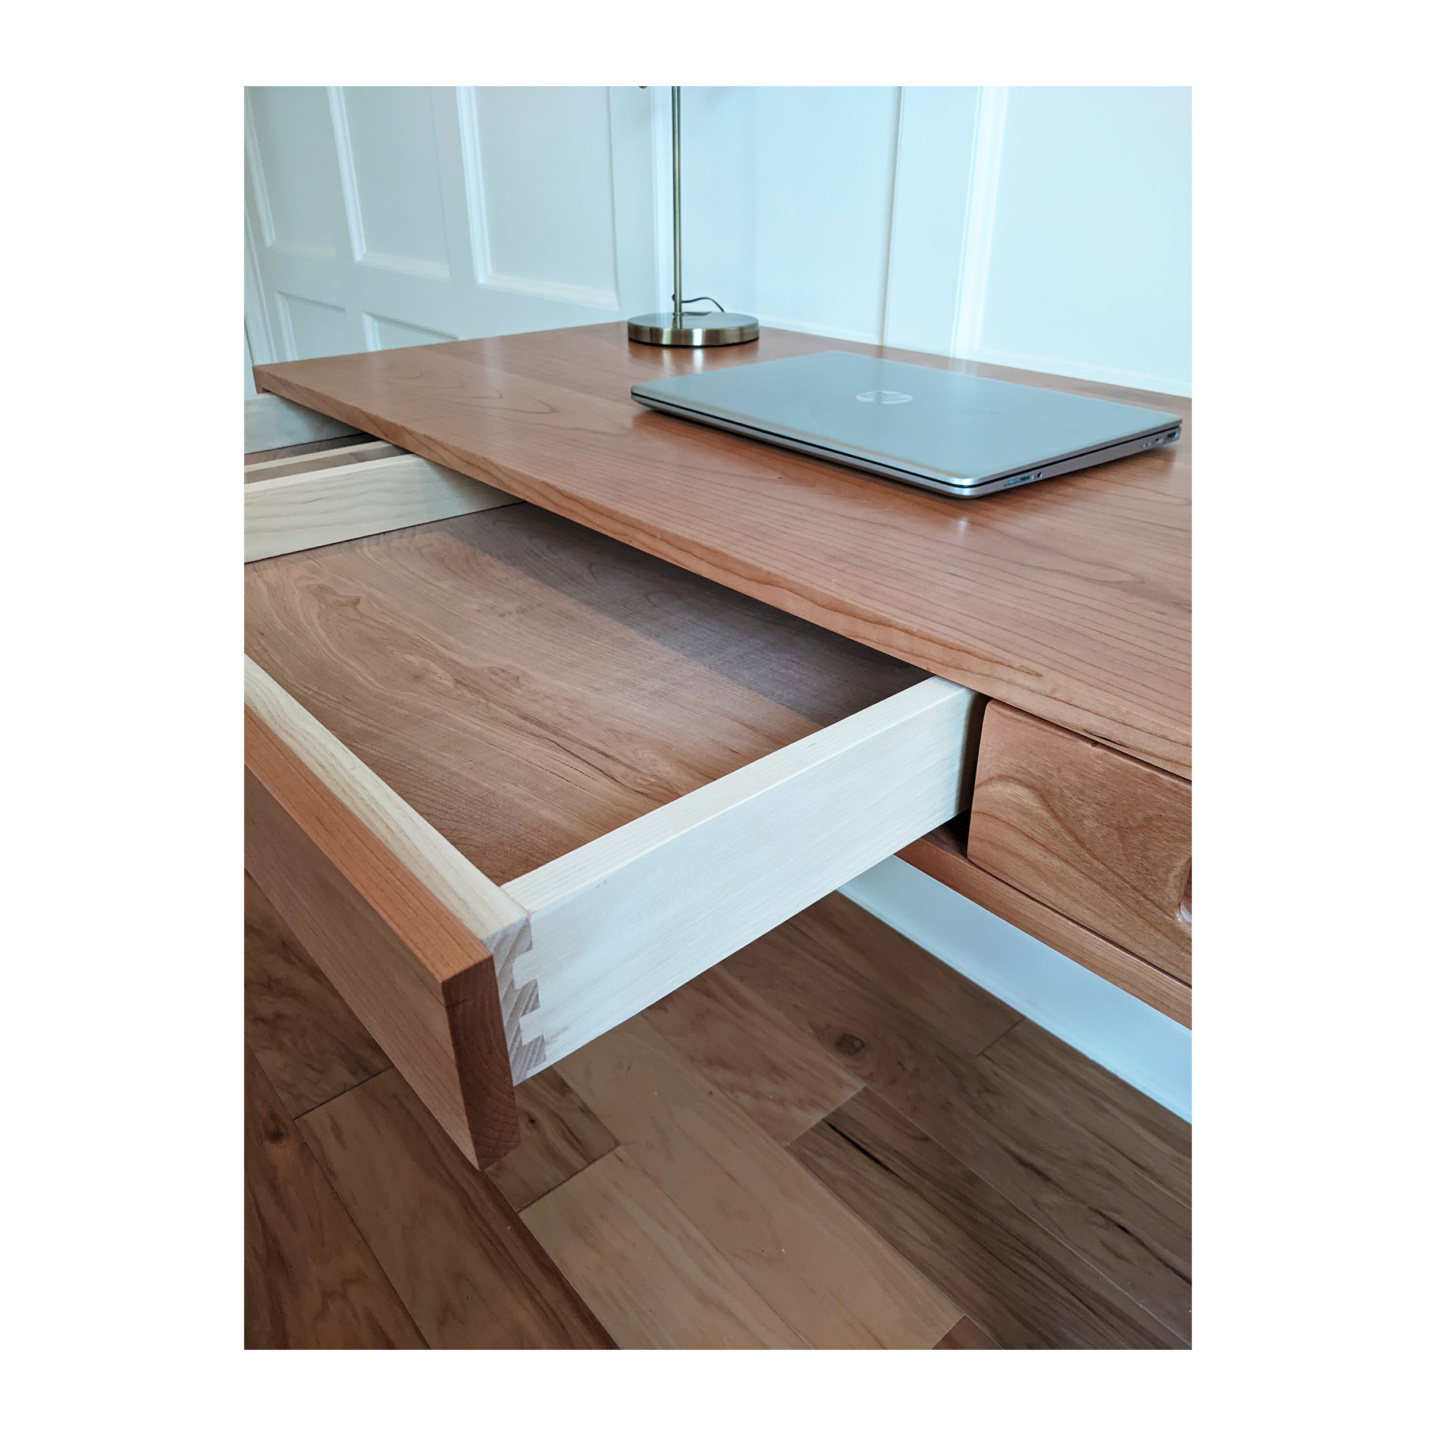 Custom Desk with solid wood dovetail drawers